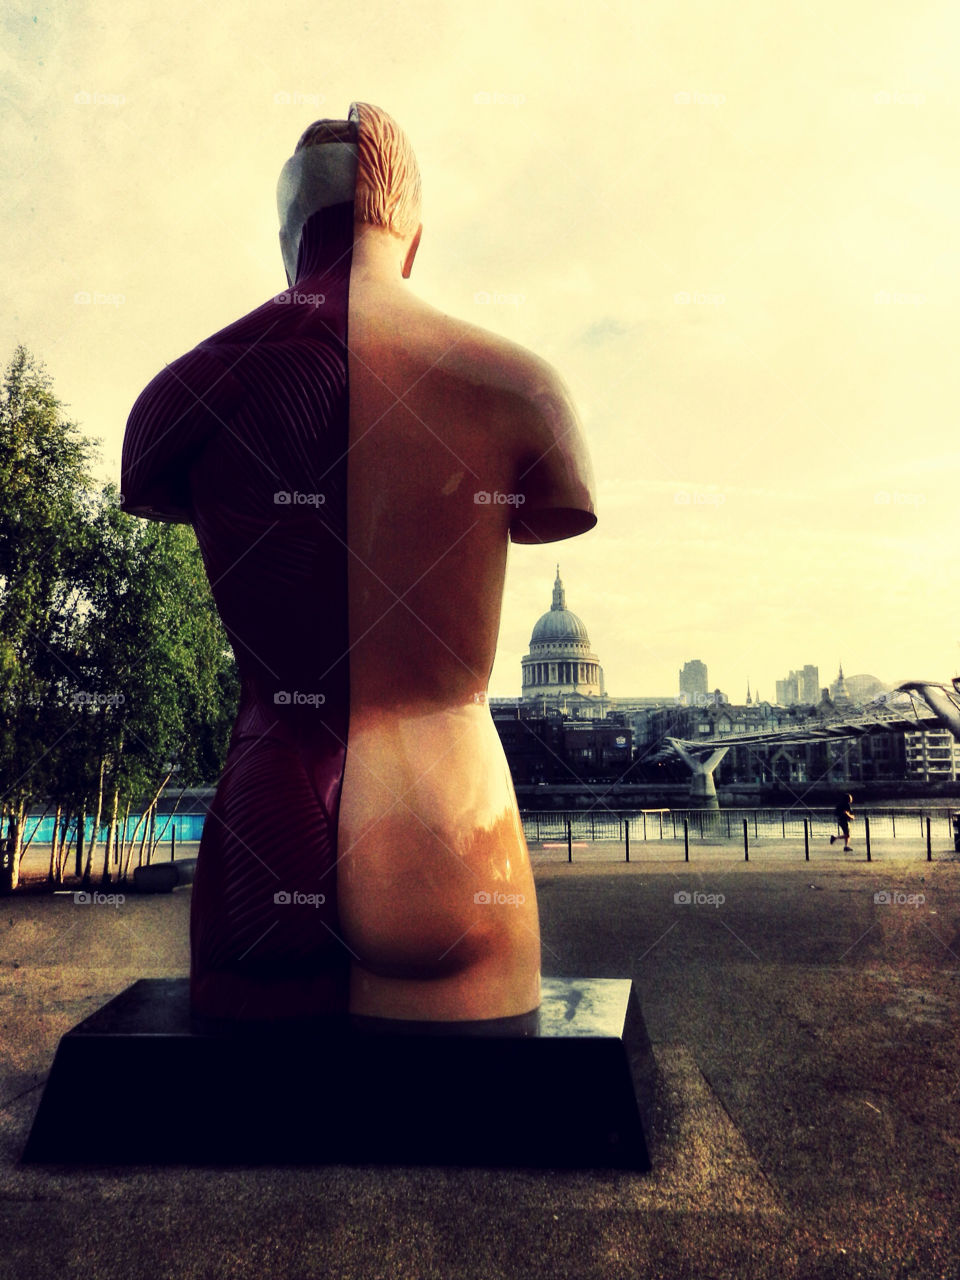 london art sculpture thames by lateproject